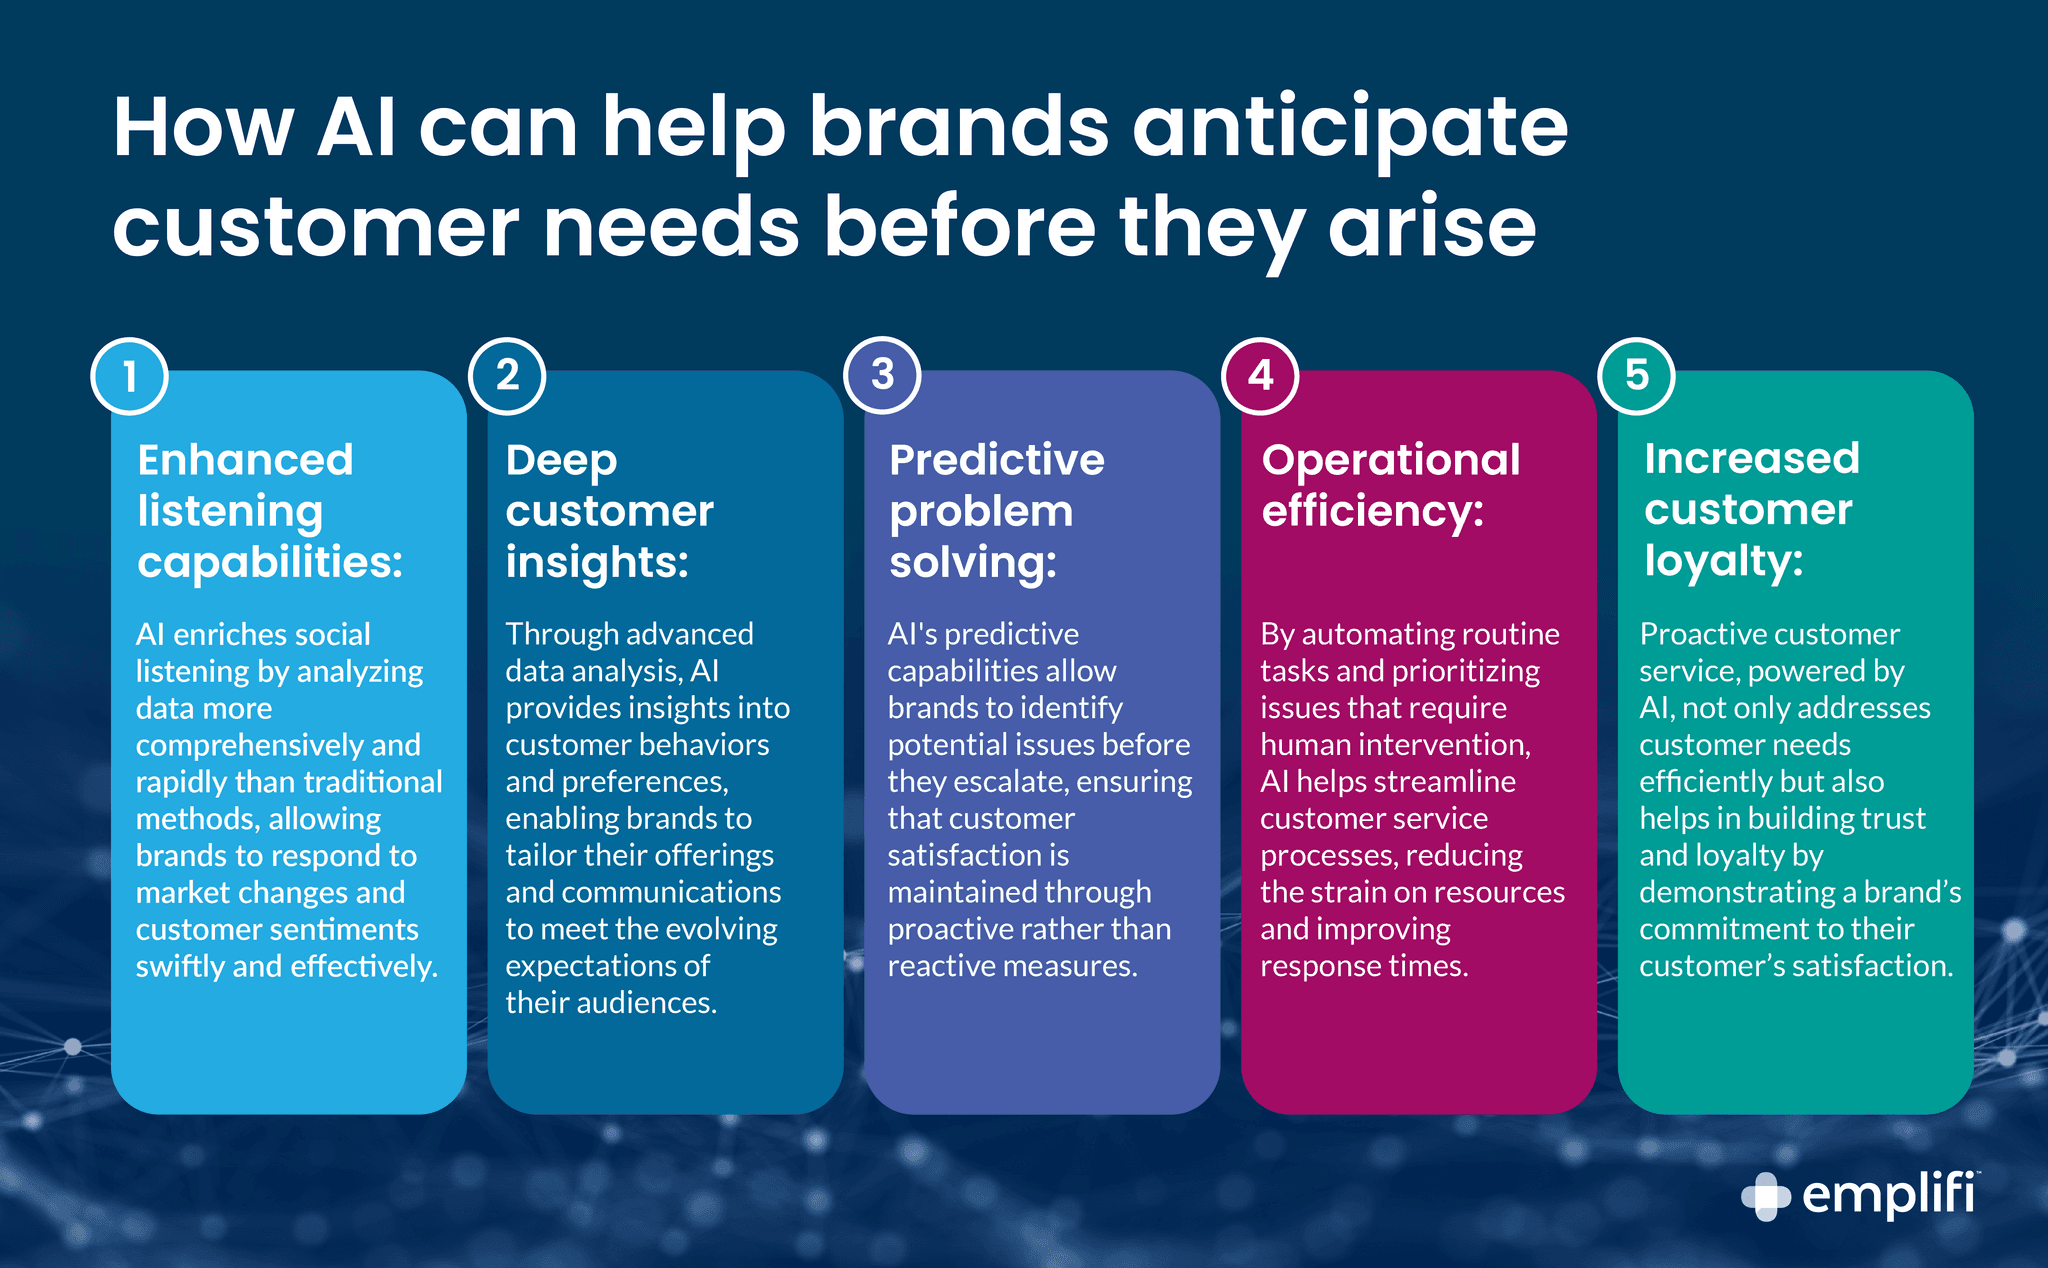 Here's five ways AI customer service can help brands anticipate customer needs before they arise.